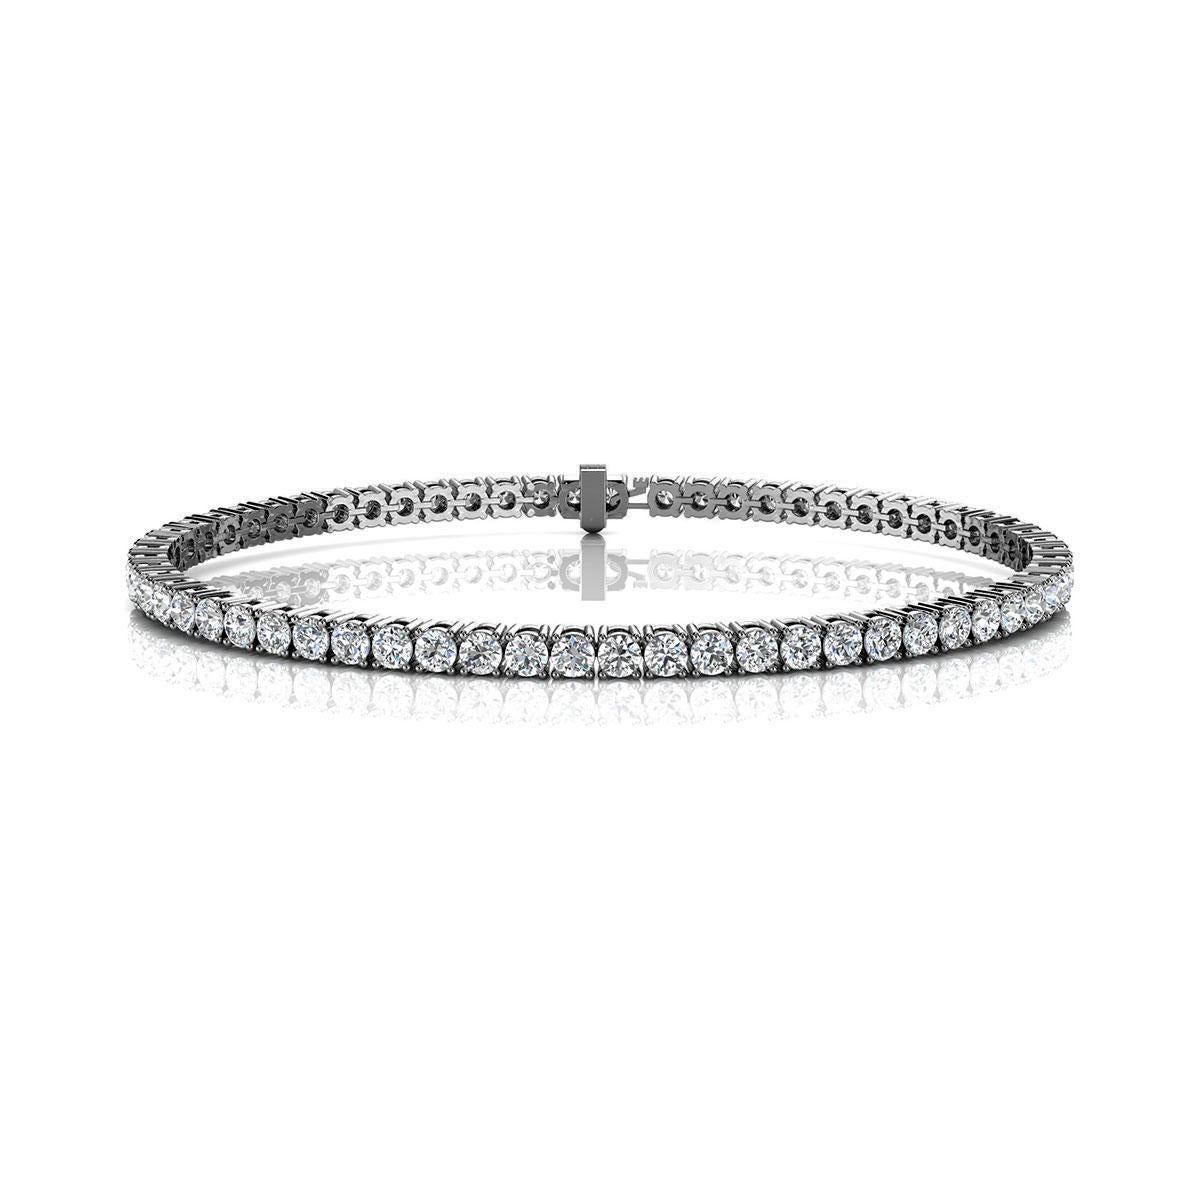 A timeless four prongs diamonds tennis bracelet. Experience the Difference!

Product details: 

Center Gemstone Type: NATURAL DIAMOND
Center Gemstone Color: WHITE
Center Gemstone Shape: ROUND
Center Diamond Carat Weight: 4
Metal: 18K White